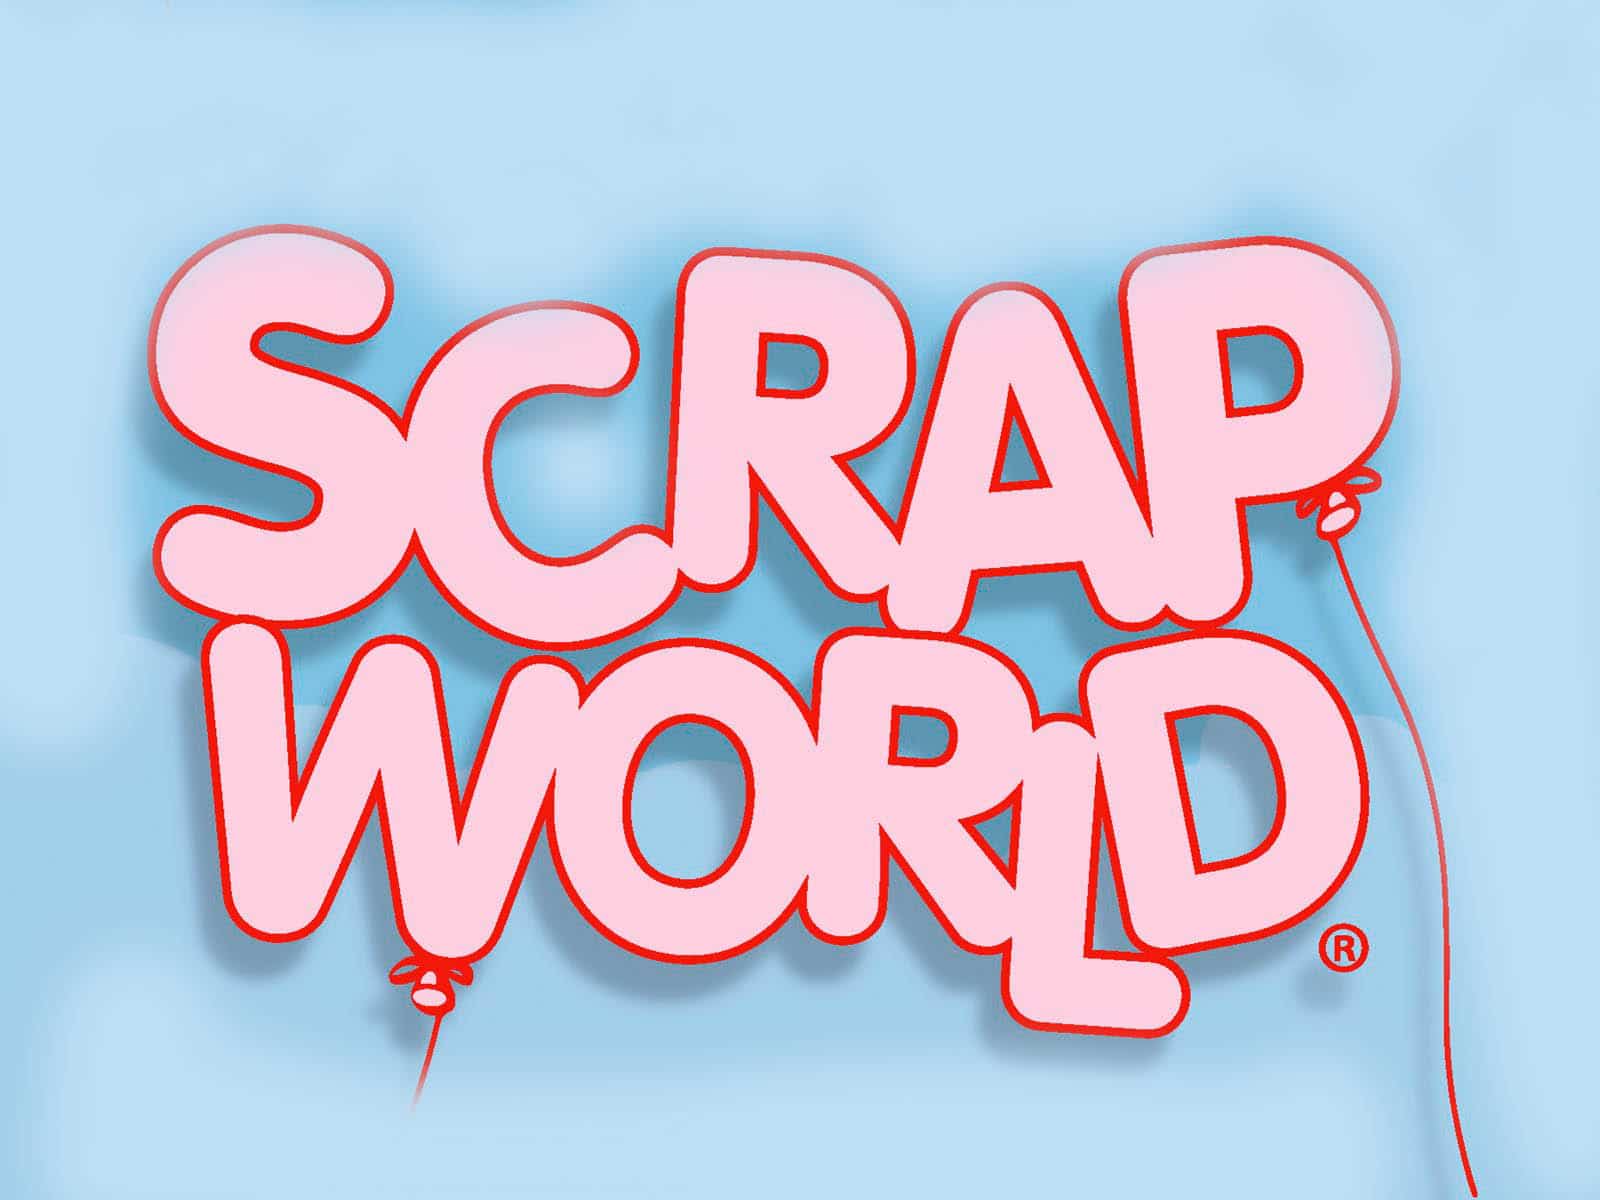 The third edition of Scrapworld 2022 is back